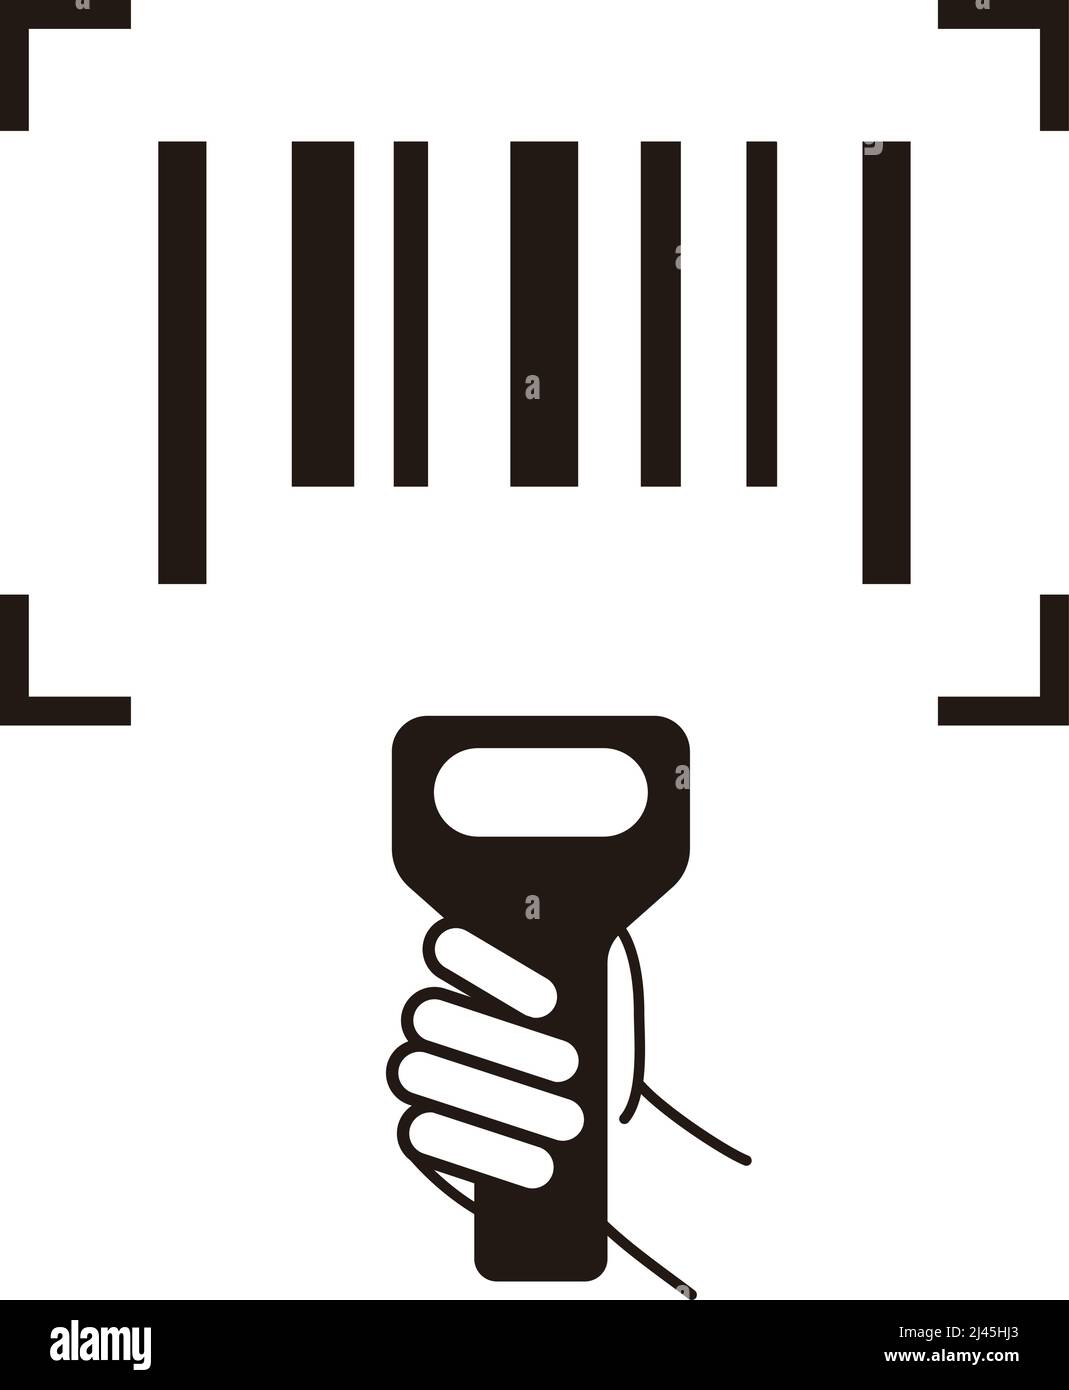 Bar code canner line icon Stock Vector